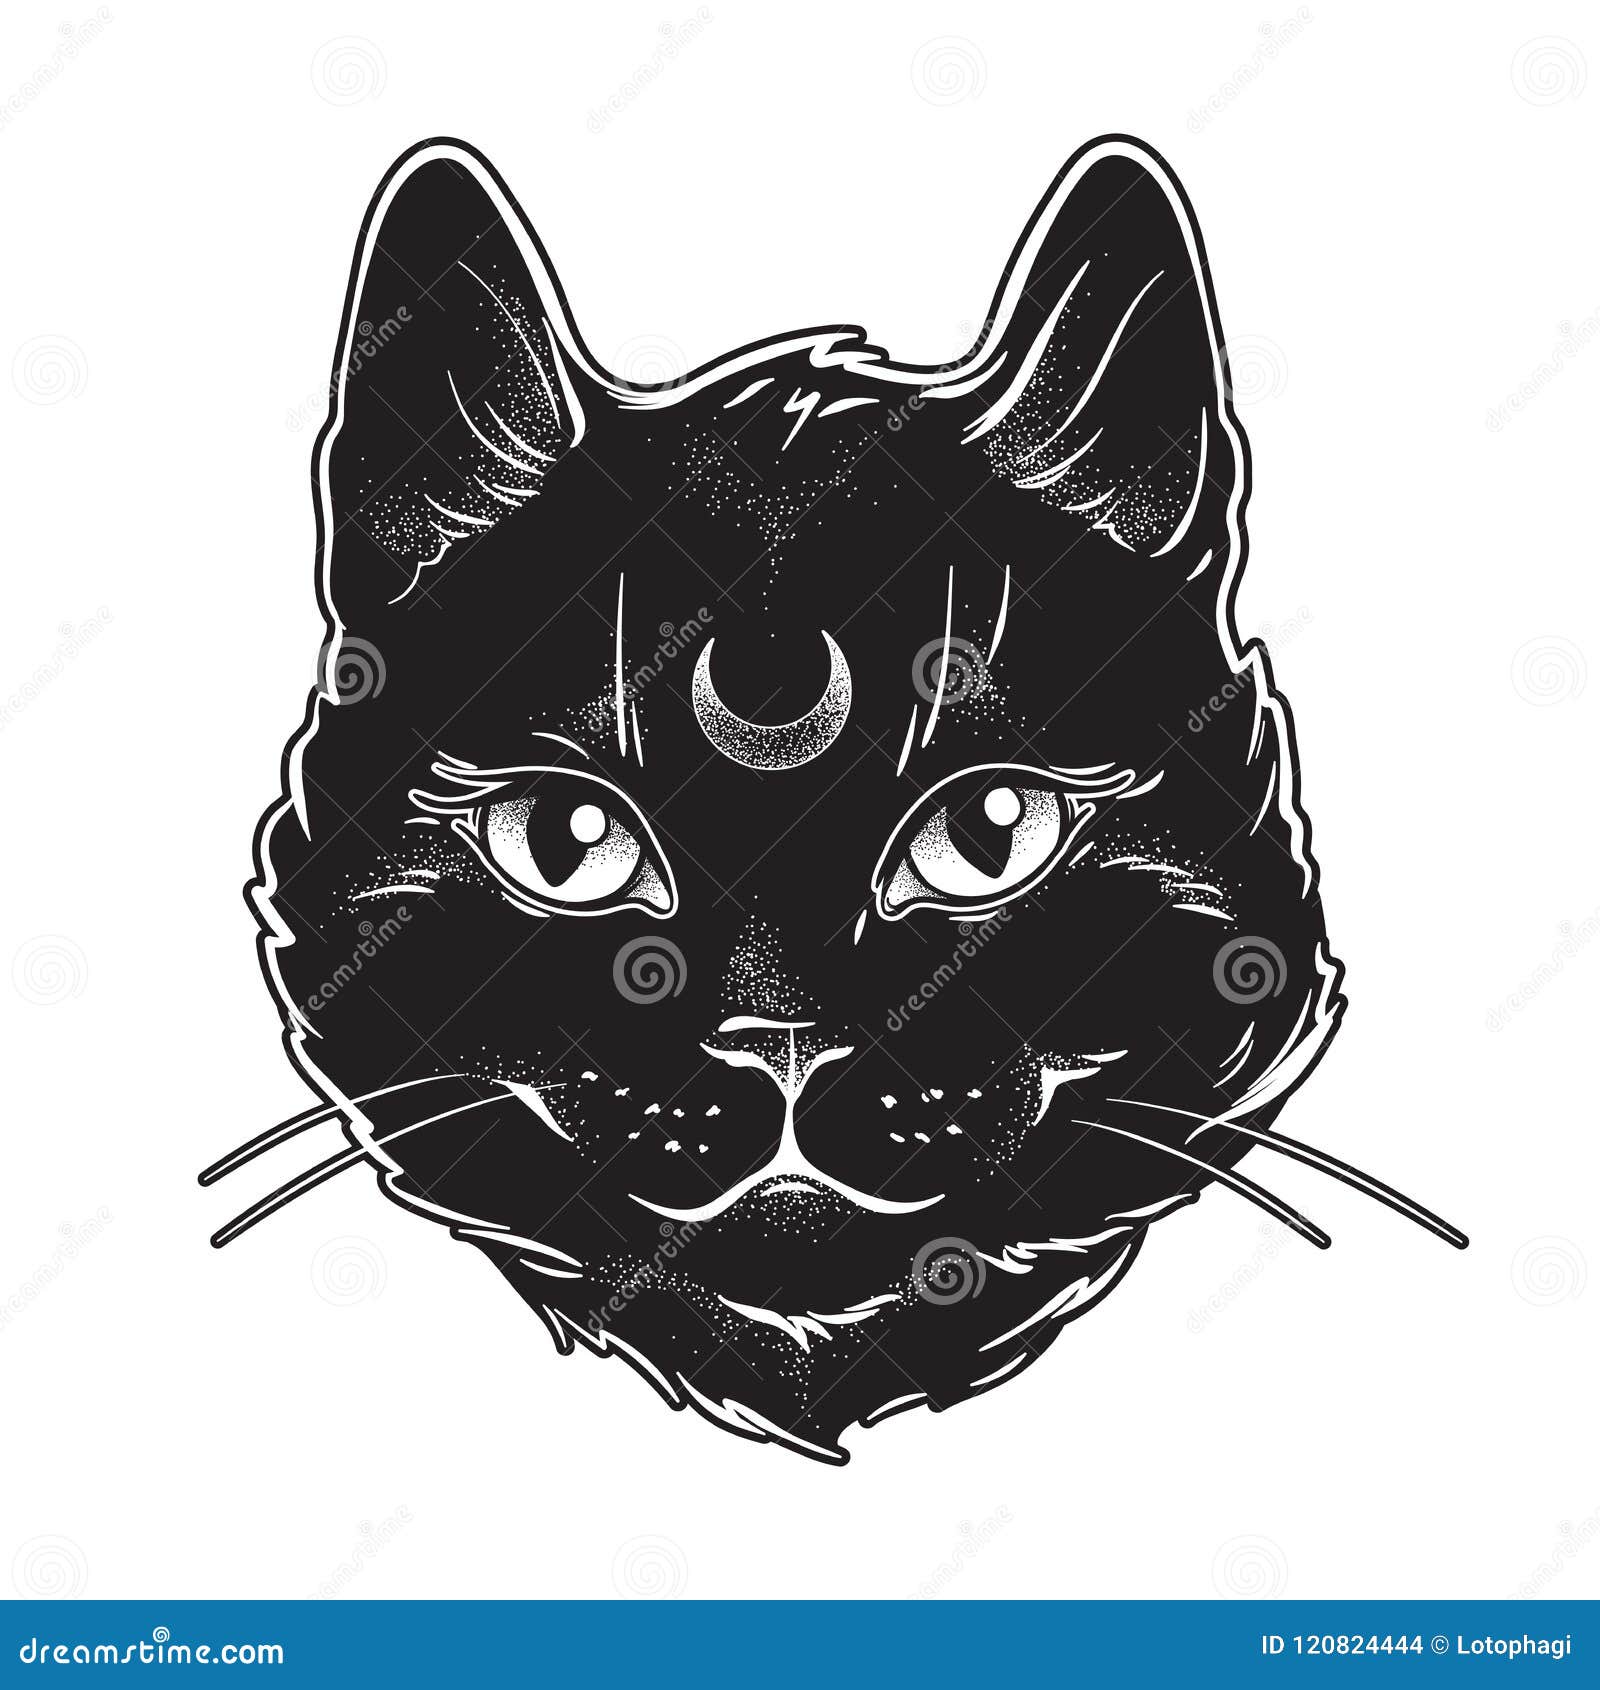 cute black cat with moon on his forehead line art and dot work. wiccan familiar spirit, halloween or pagan witchcraft theme tapest